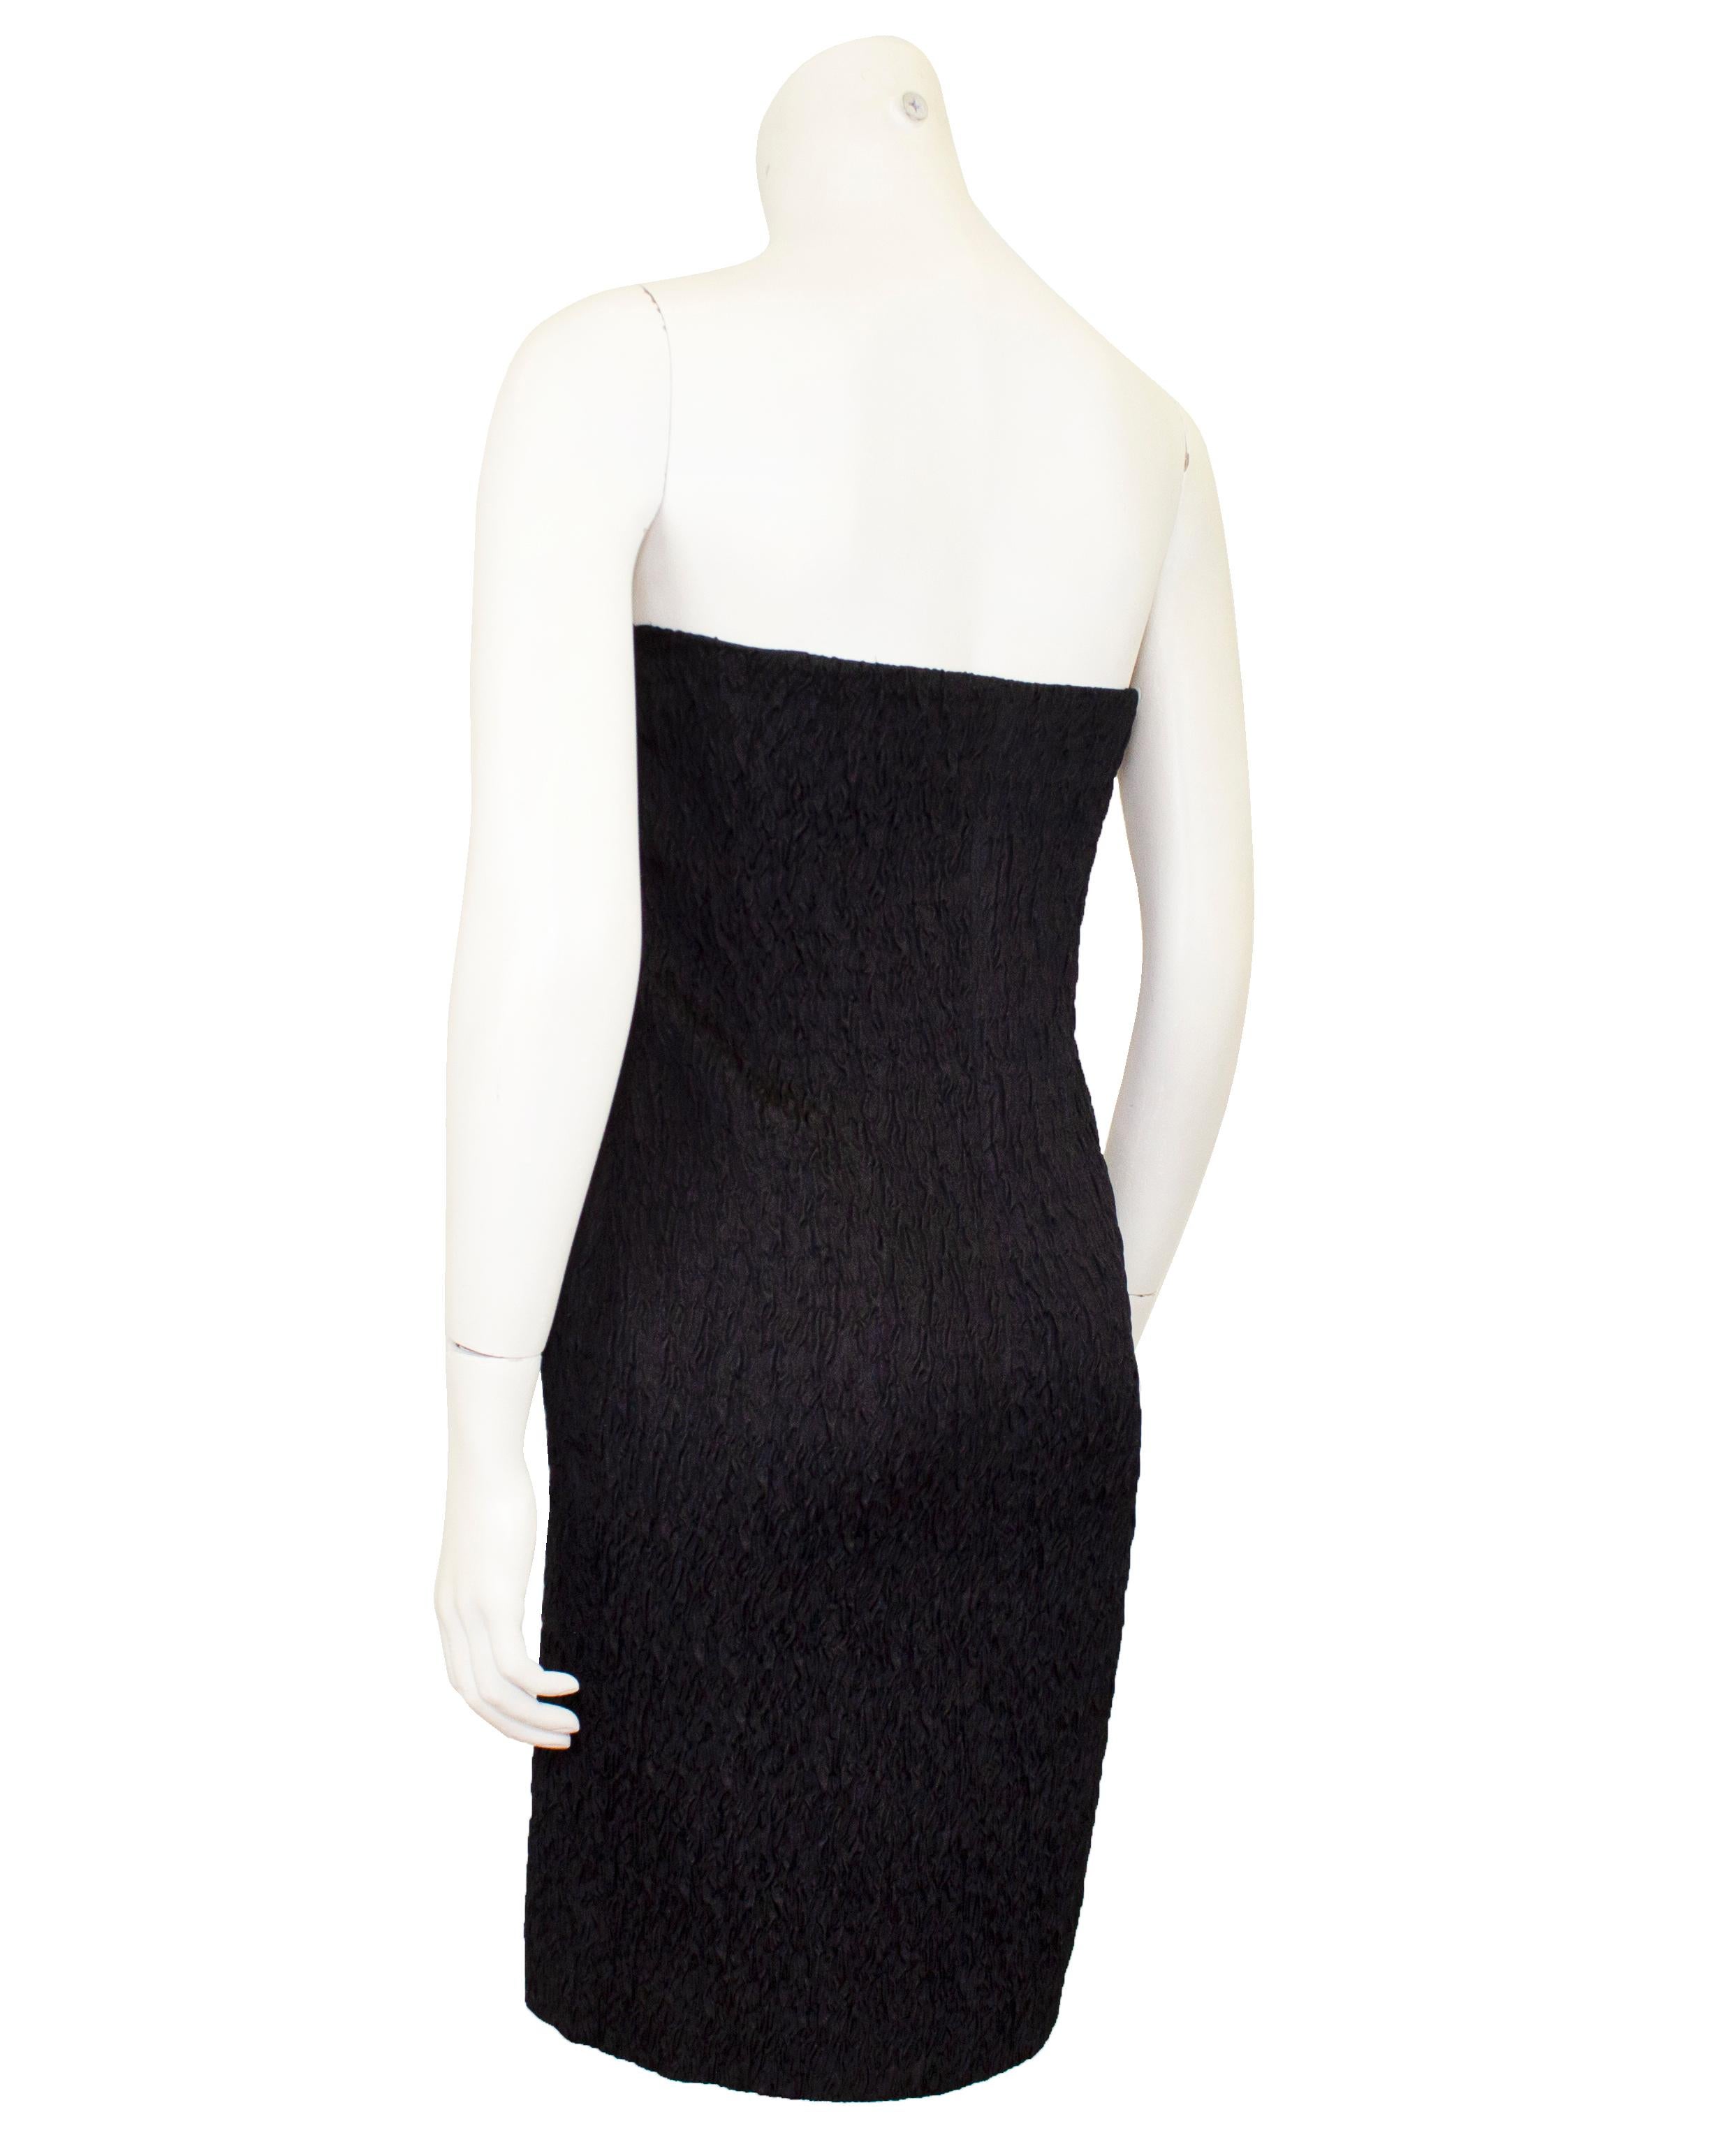 1990s Calvin Klein Collection Strapless Black Blistered Silk Dress In Good Condition For Sale In Toronto, Ontario